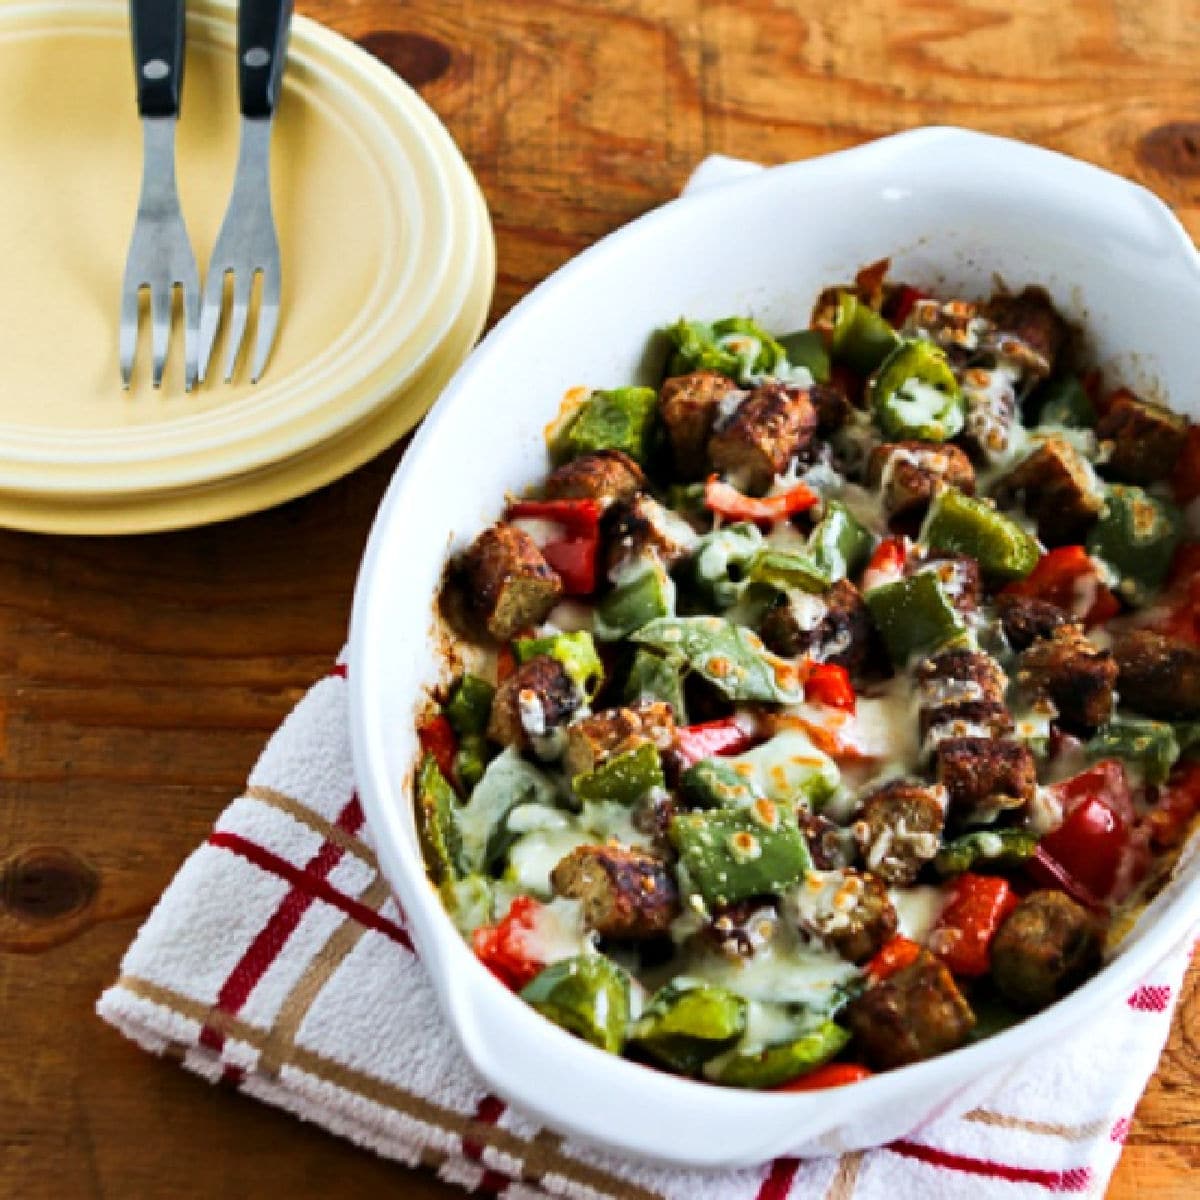 Square image of Low-Carb No-Egg Breakfast Bake with Sausage and Peppers in baking dish with plates, forks.